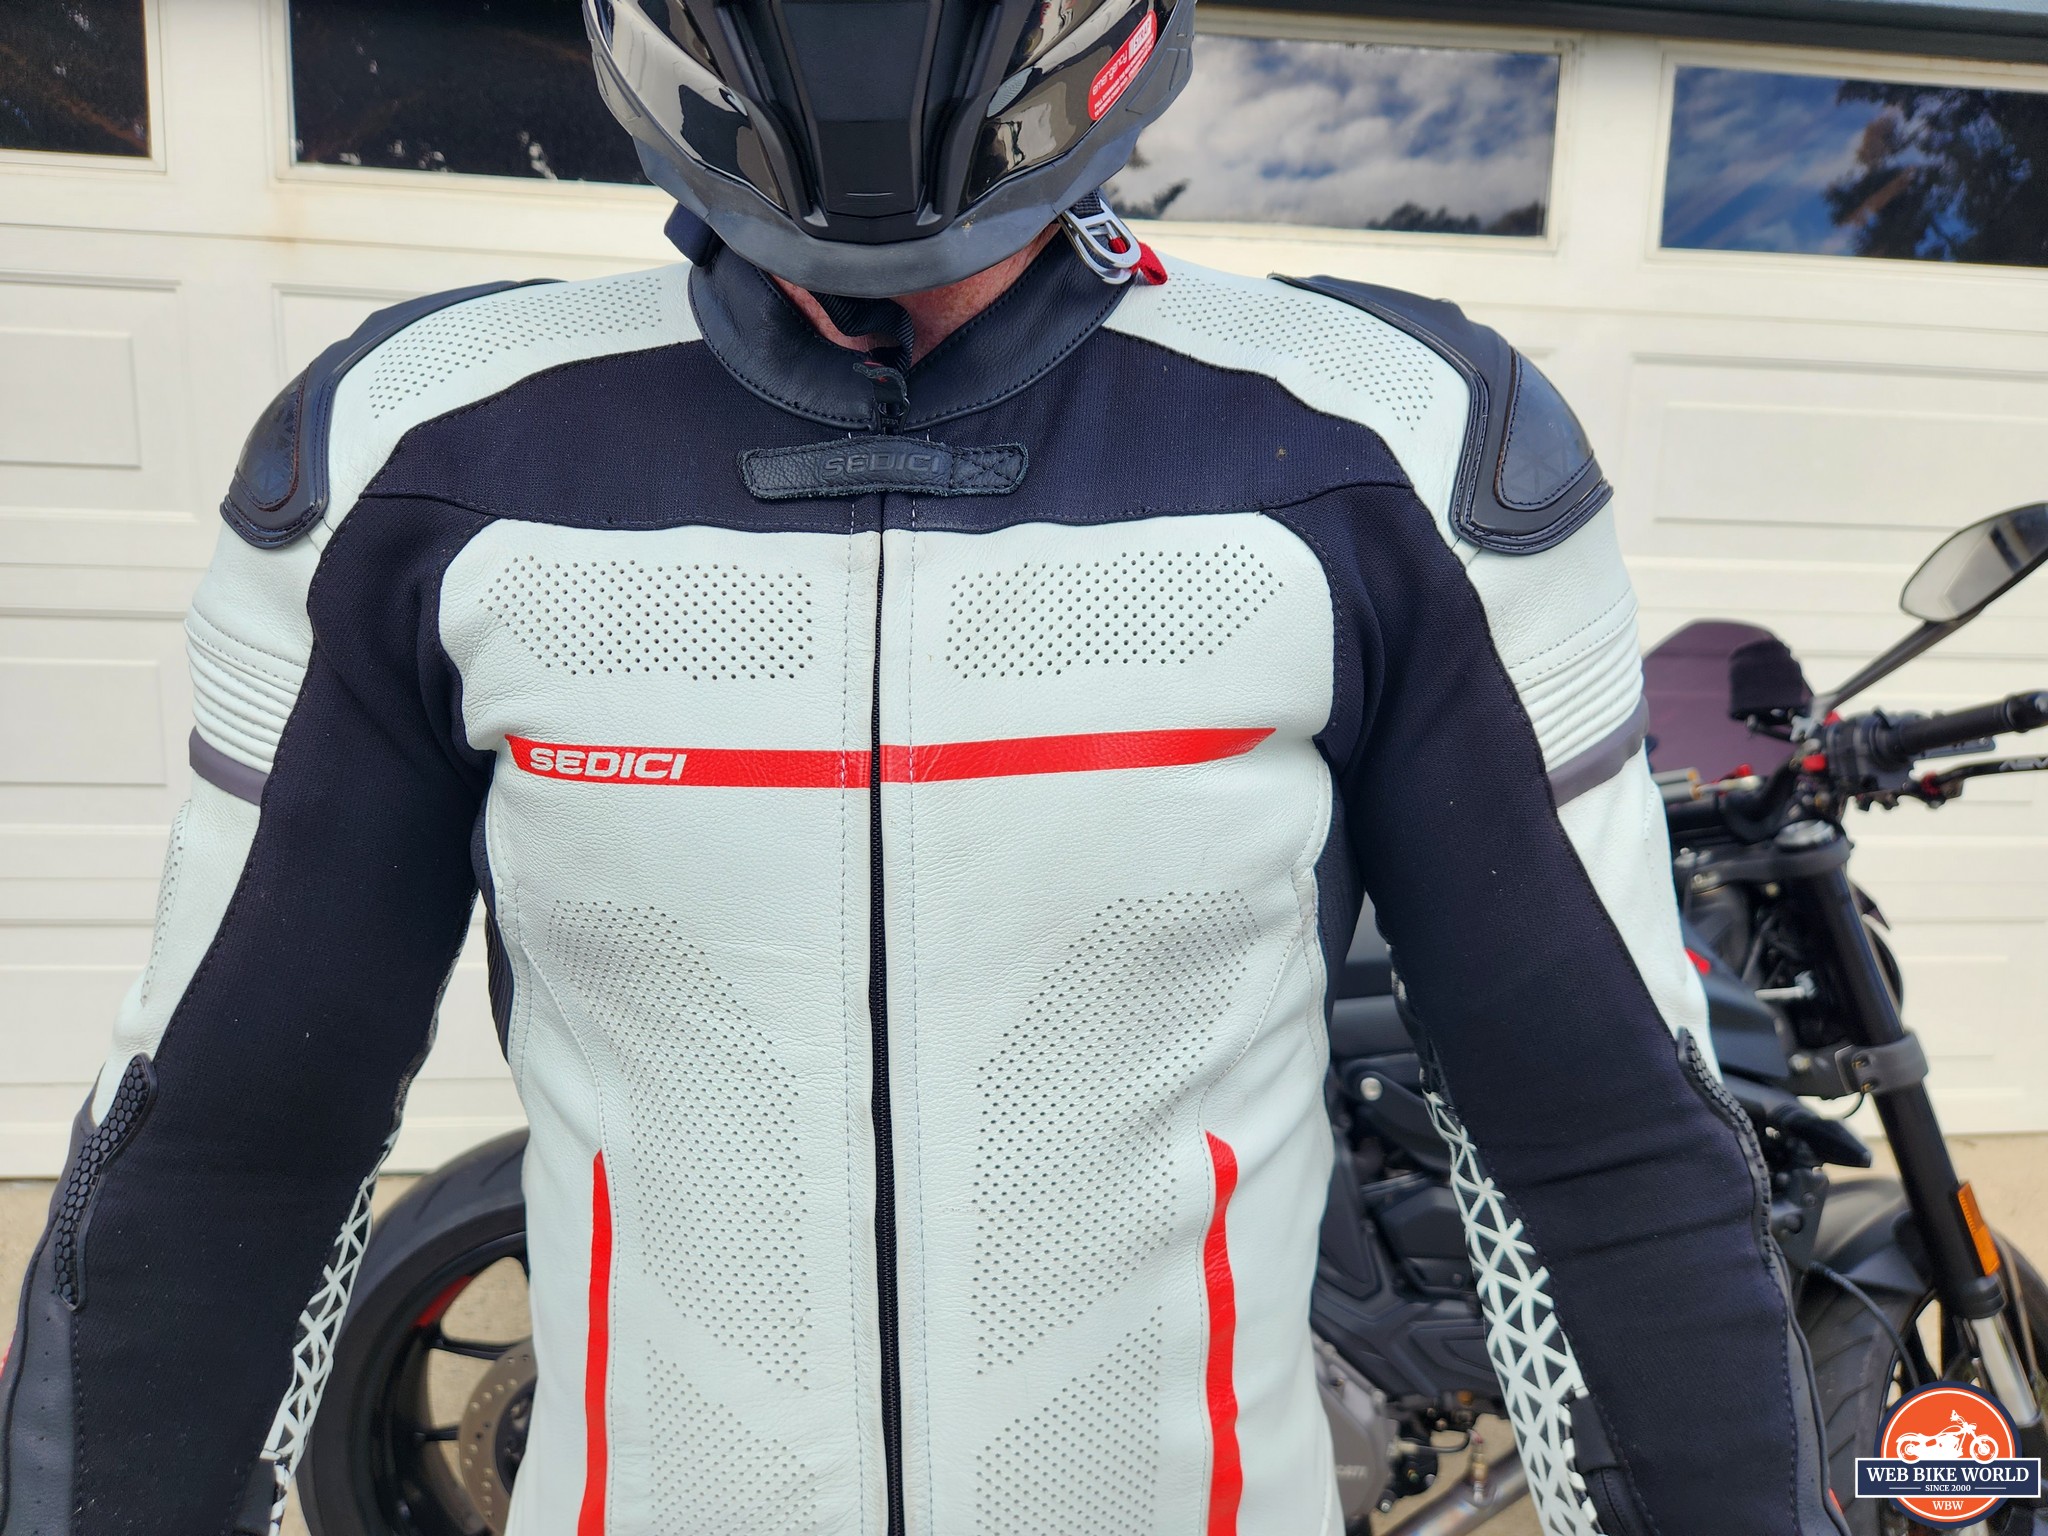 Front view of the race suit and perforations